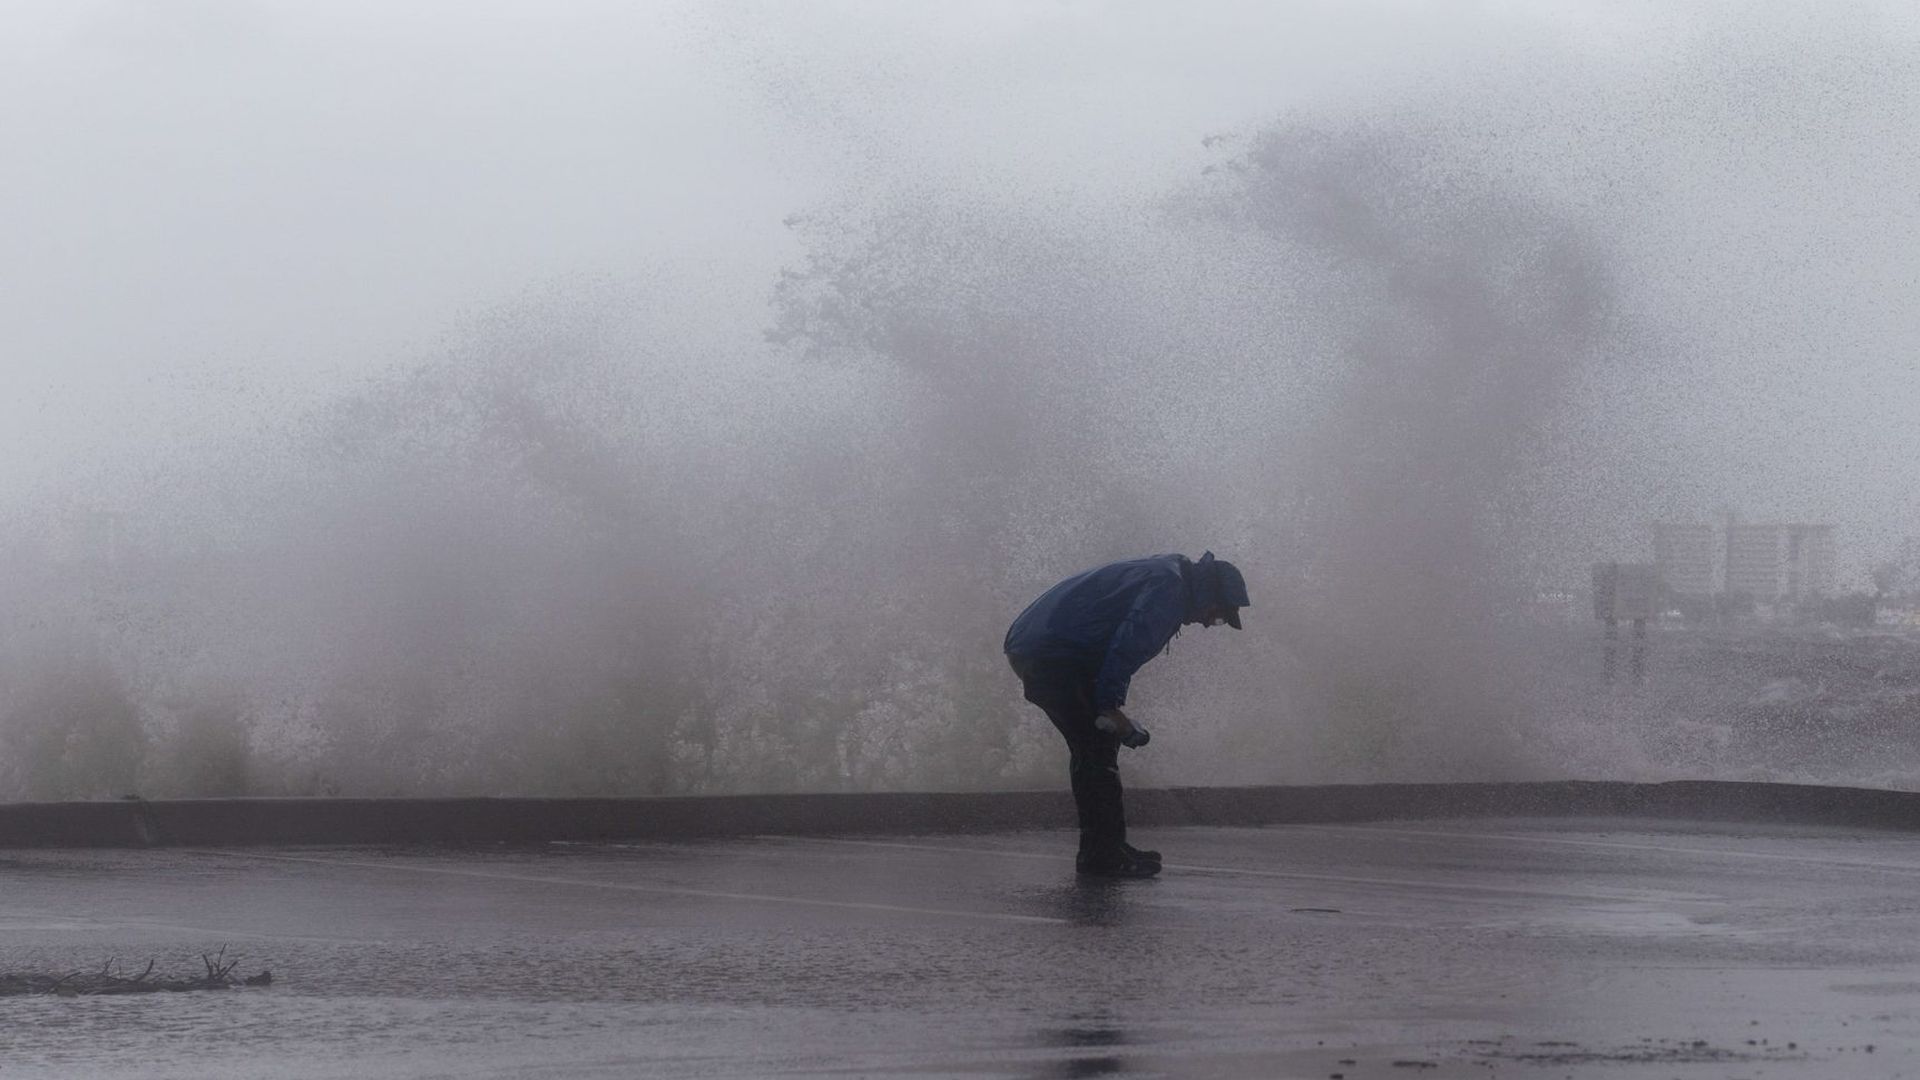  Strong gusts of wind and bands of heavy rain hit the Jensen Beach Causeway Park in Jensen Beach, Florida on Tuesday. 